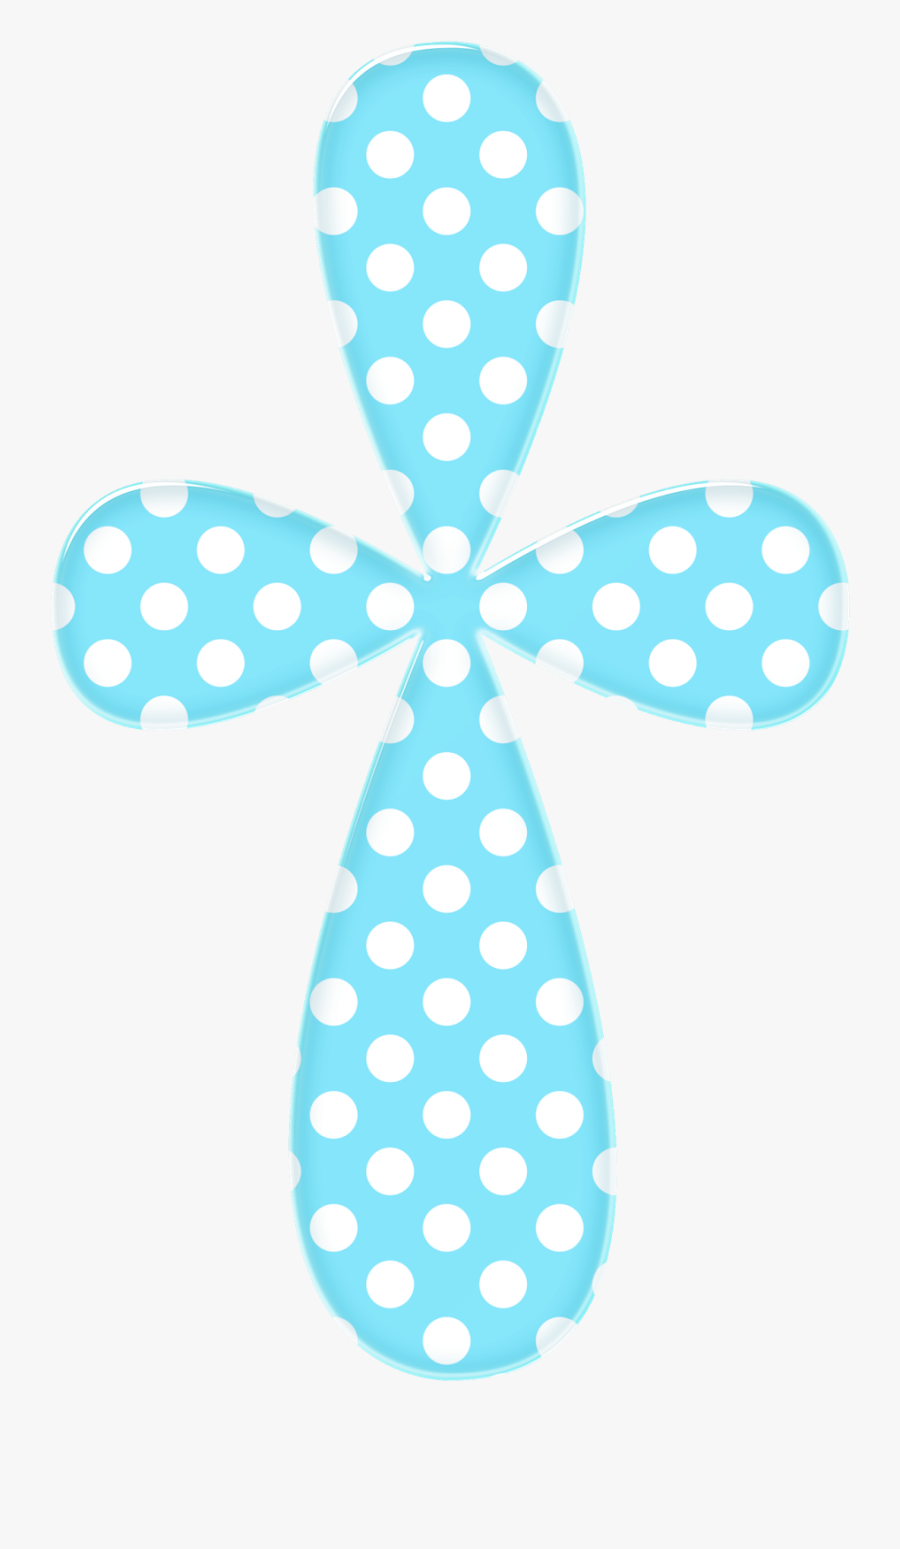 Find This Pin And More On Ideas Comunion By Teclaght - Polka Dot, Transparent Clipart